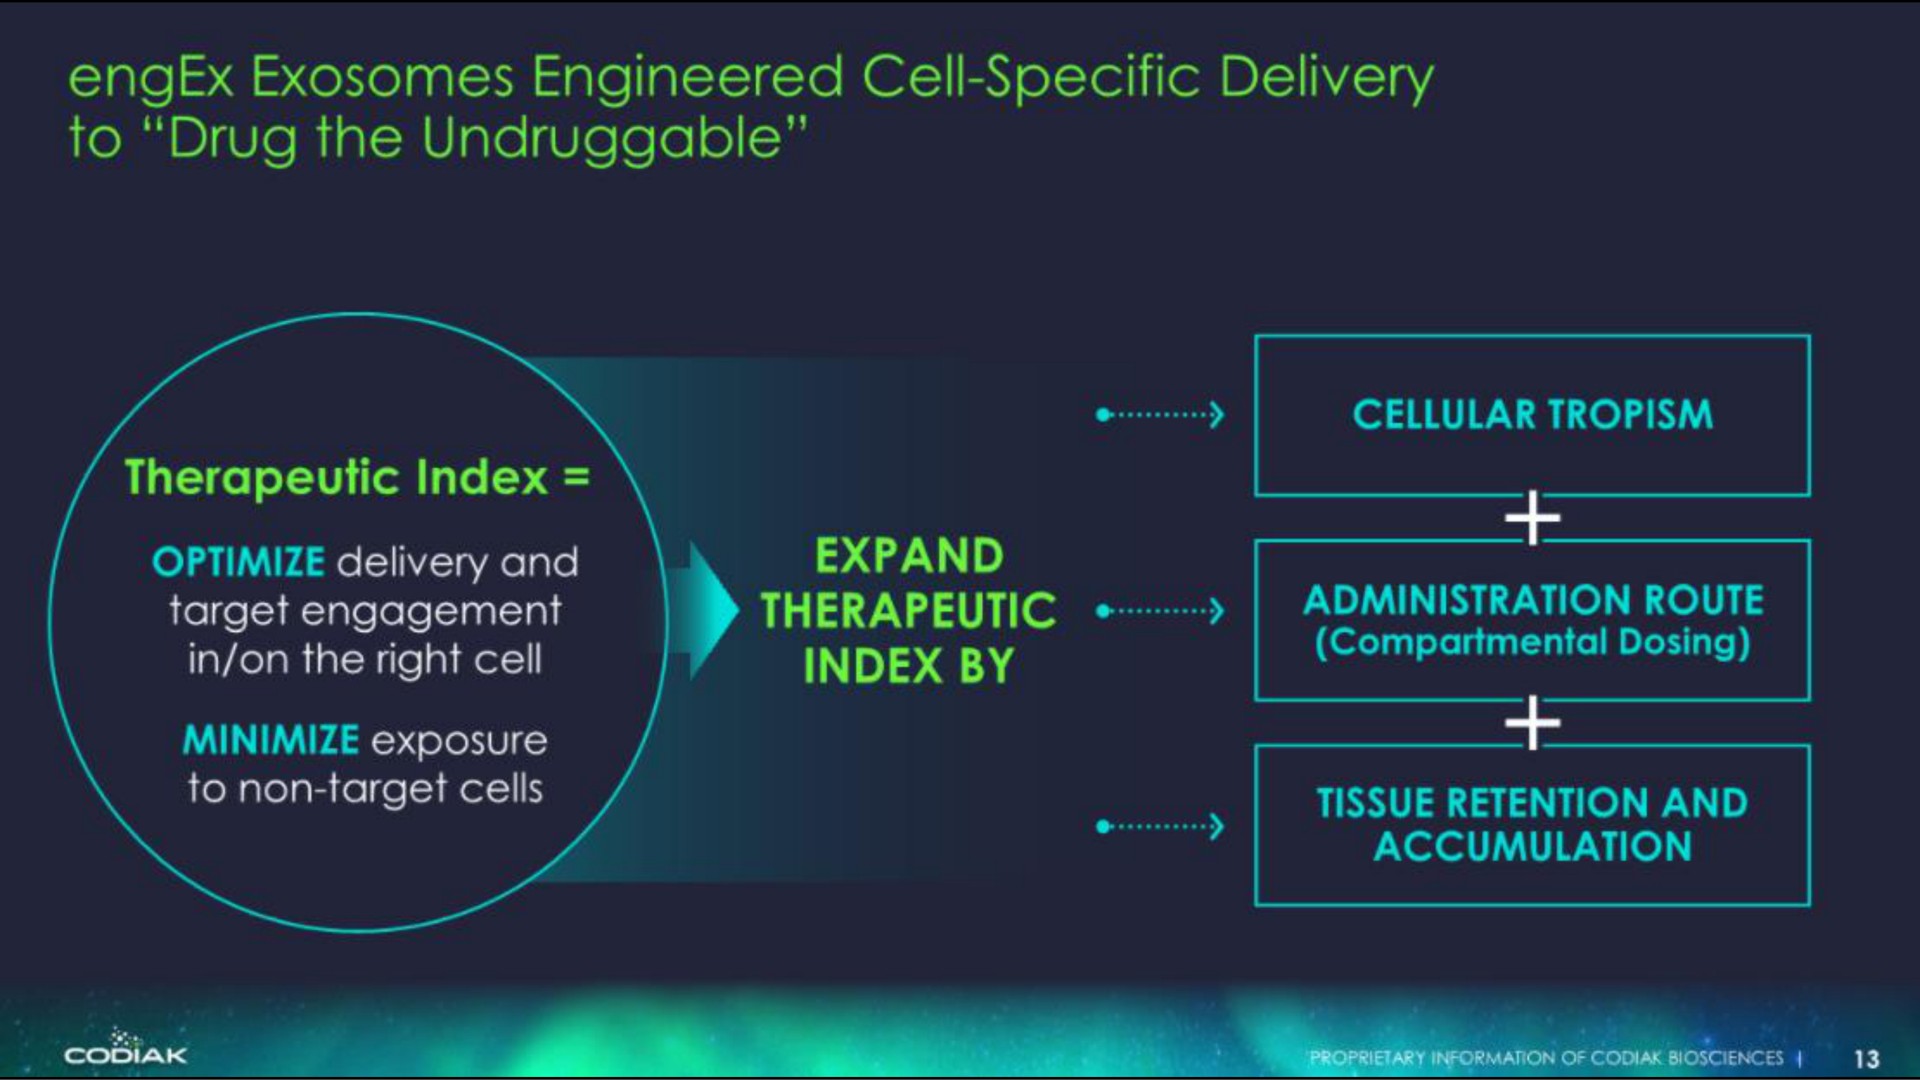 engineered cell specific delivery aire | Codiak